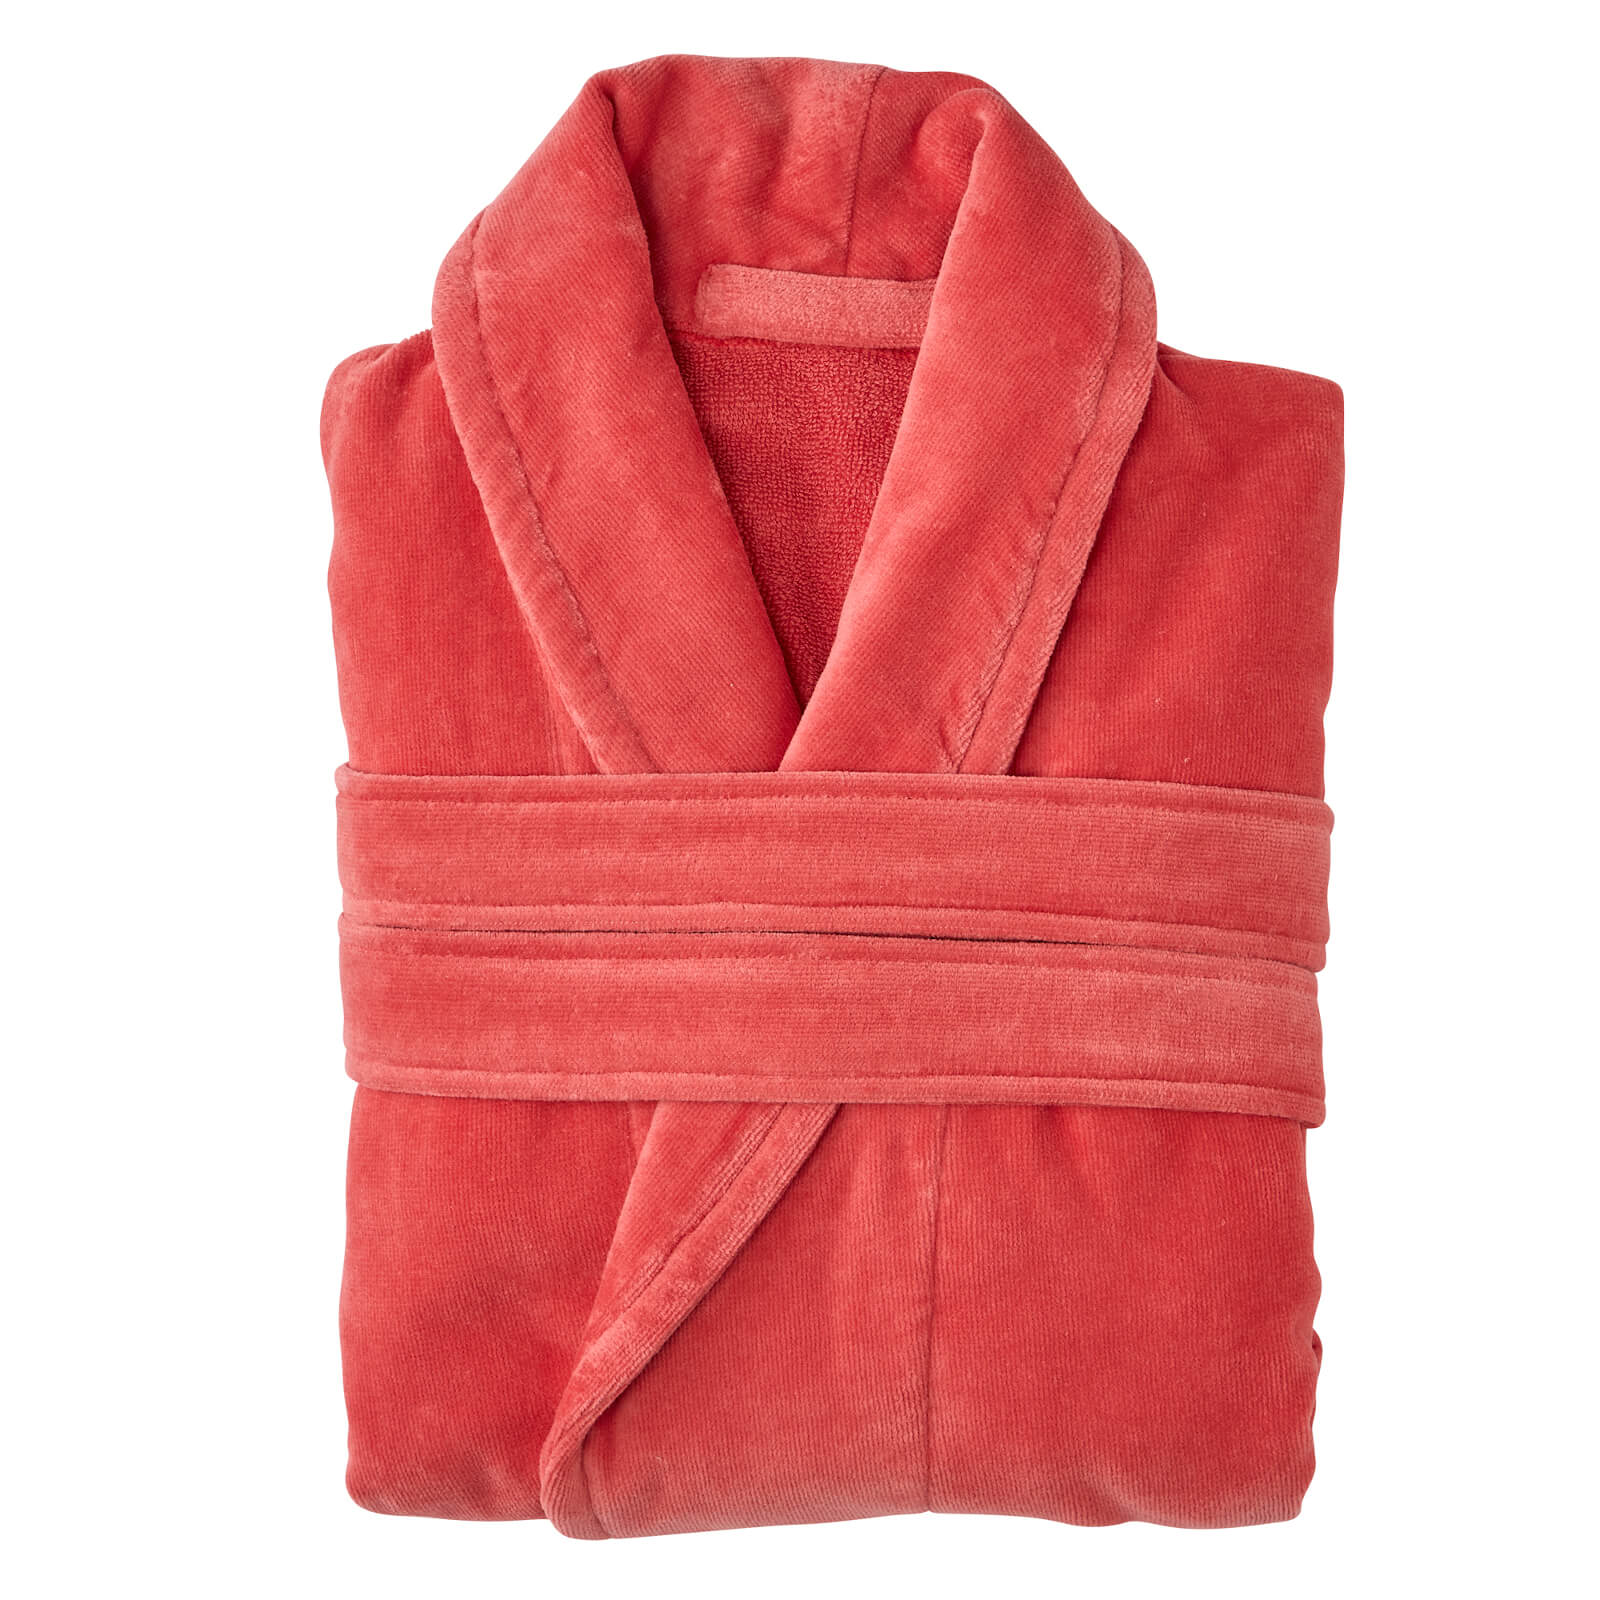 Christy Supreme Velour Cotton Dressing Gown - Coral - S